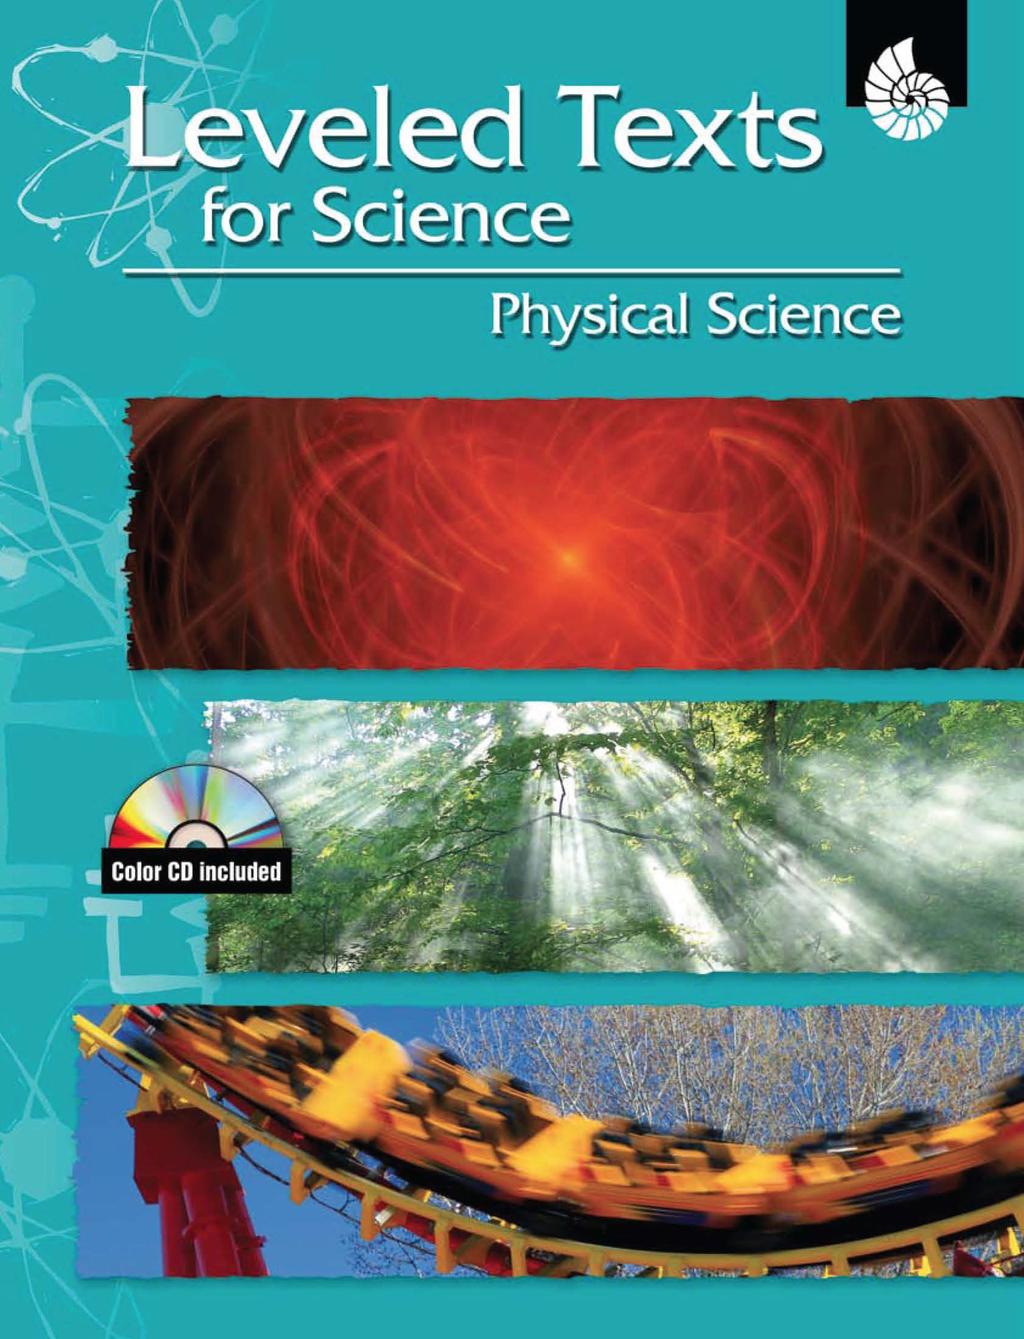 Sample Pages from Leveled Texts for Science: Physical Science The following sample pages are included in this download: Table of Contents Readability Chart Sample Passage For correlations to